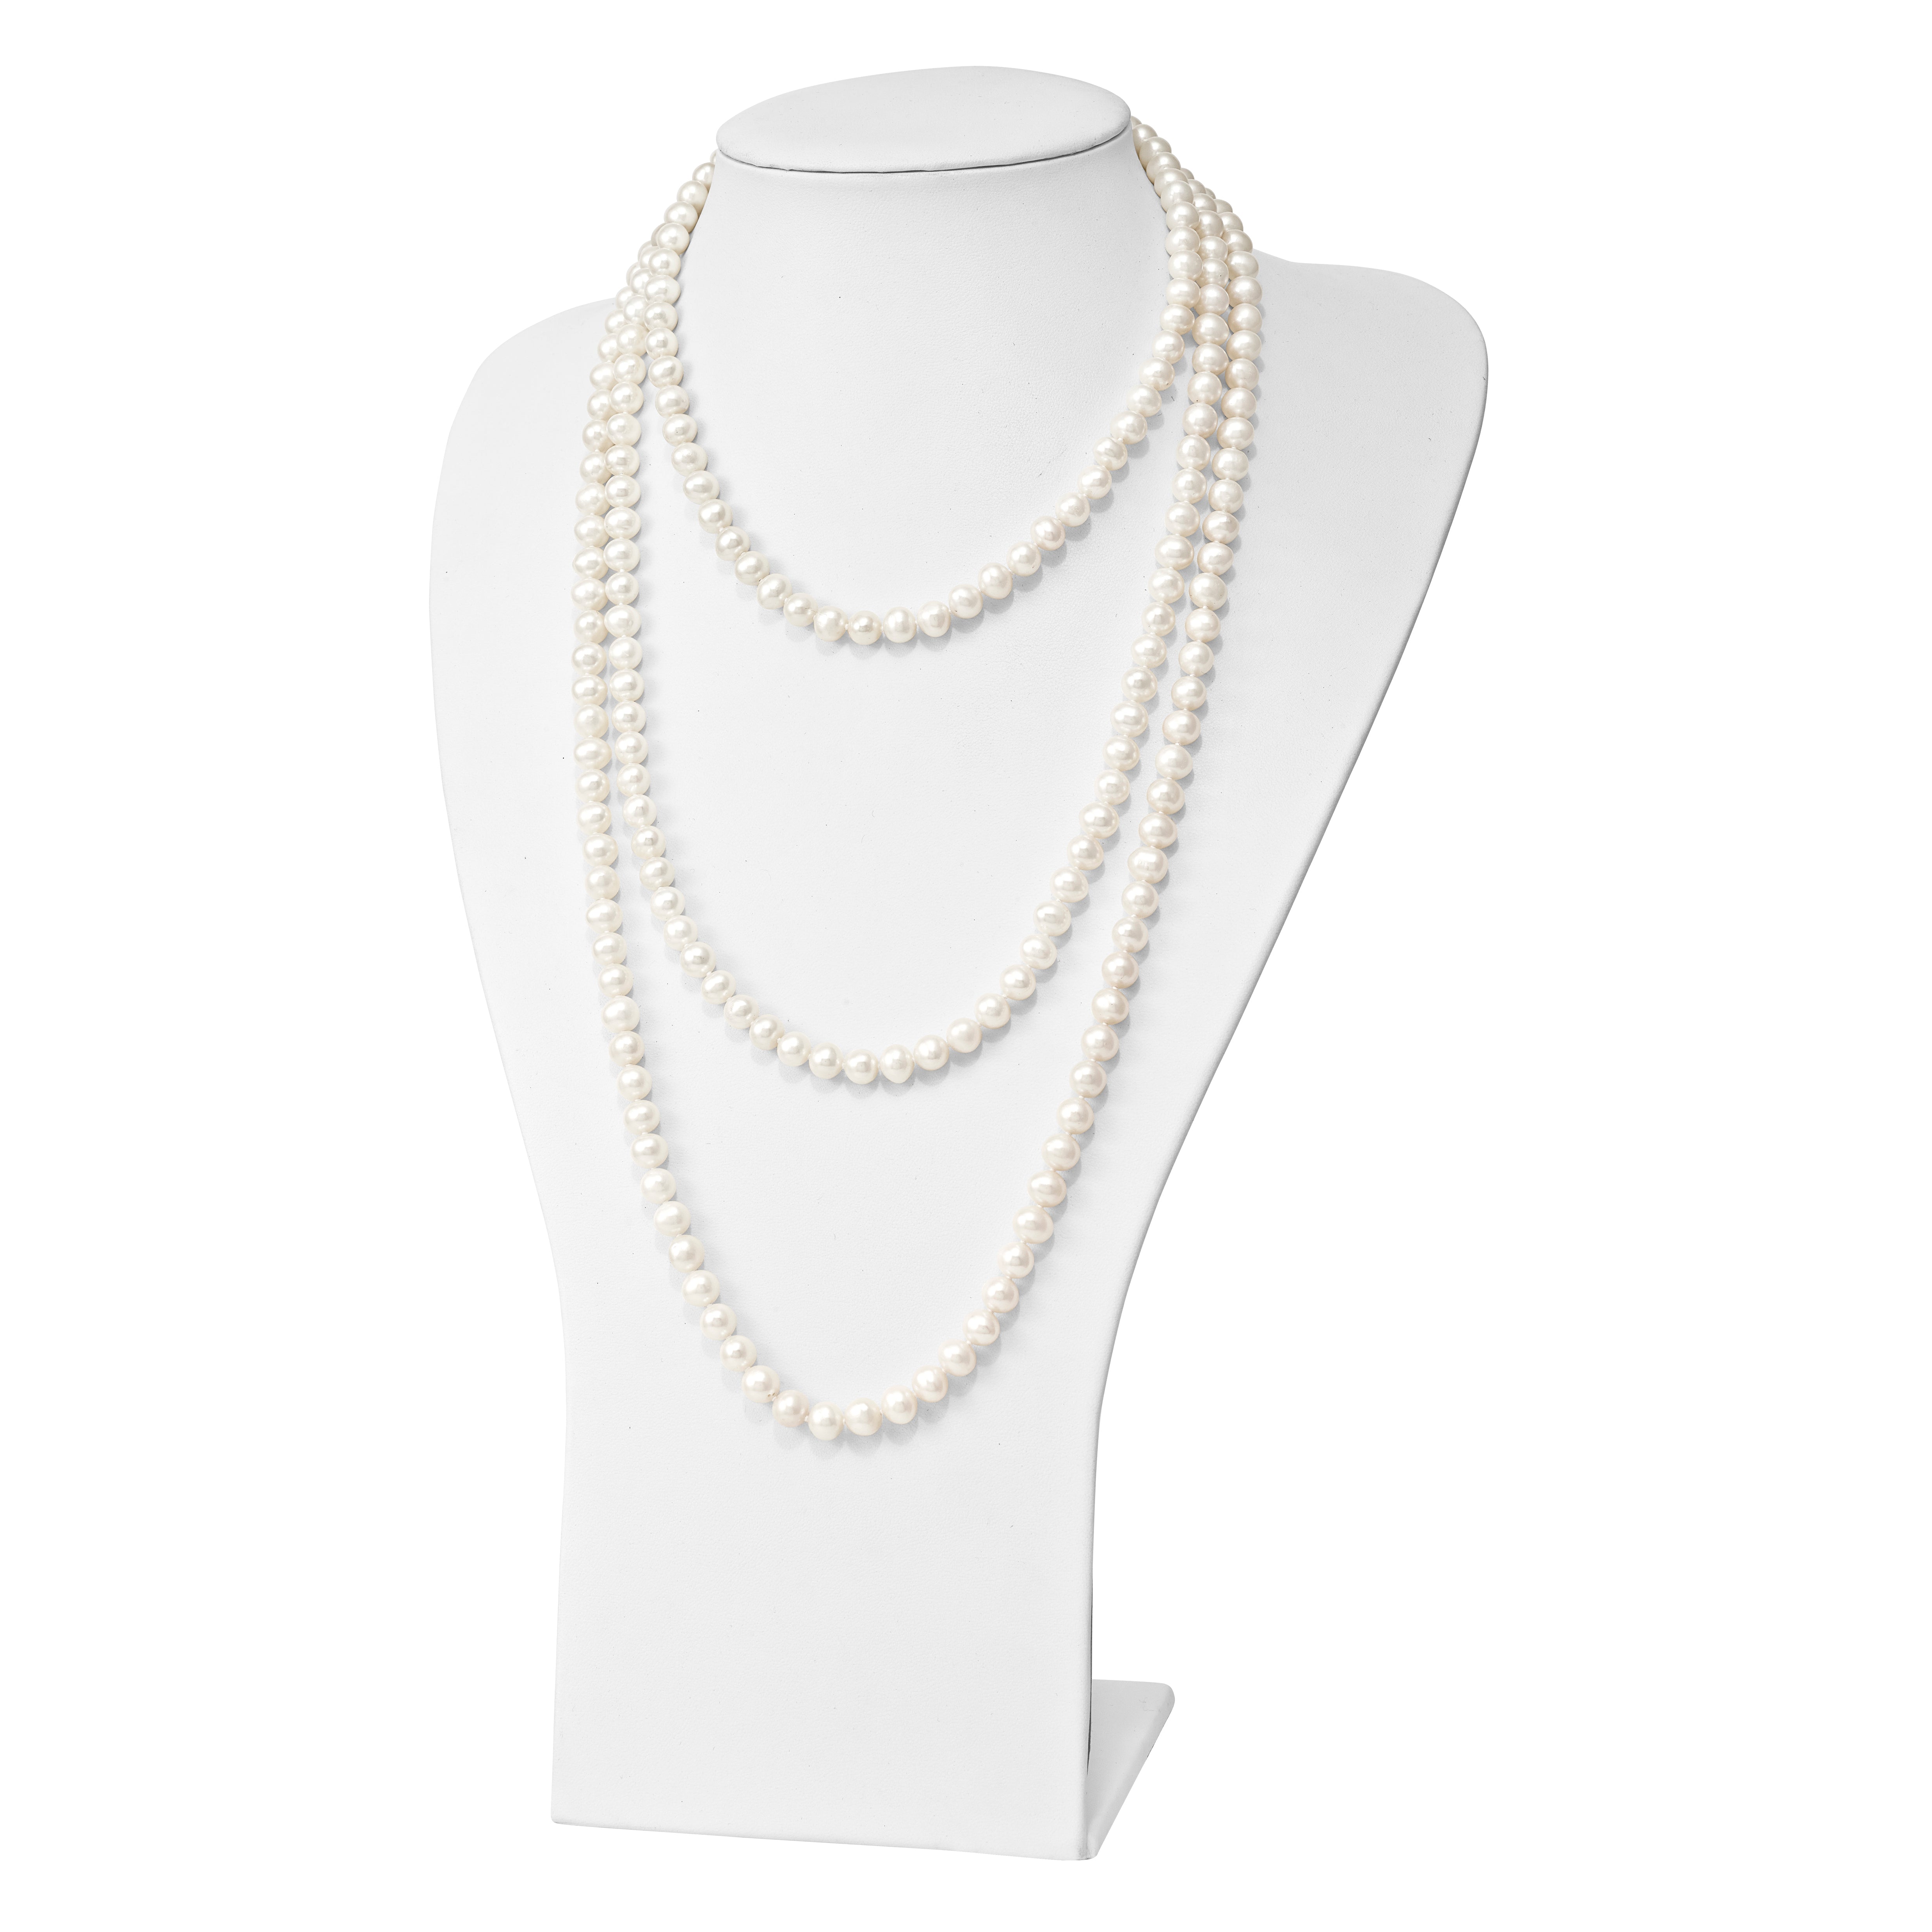 9-10mm White Semi-round Freshwater Cultured Pearl Slip-on Endless 80 inch Necklace